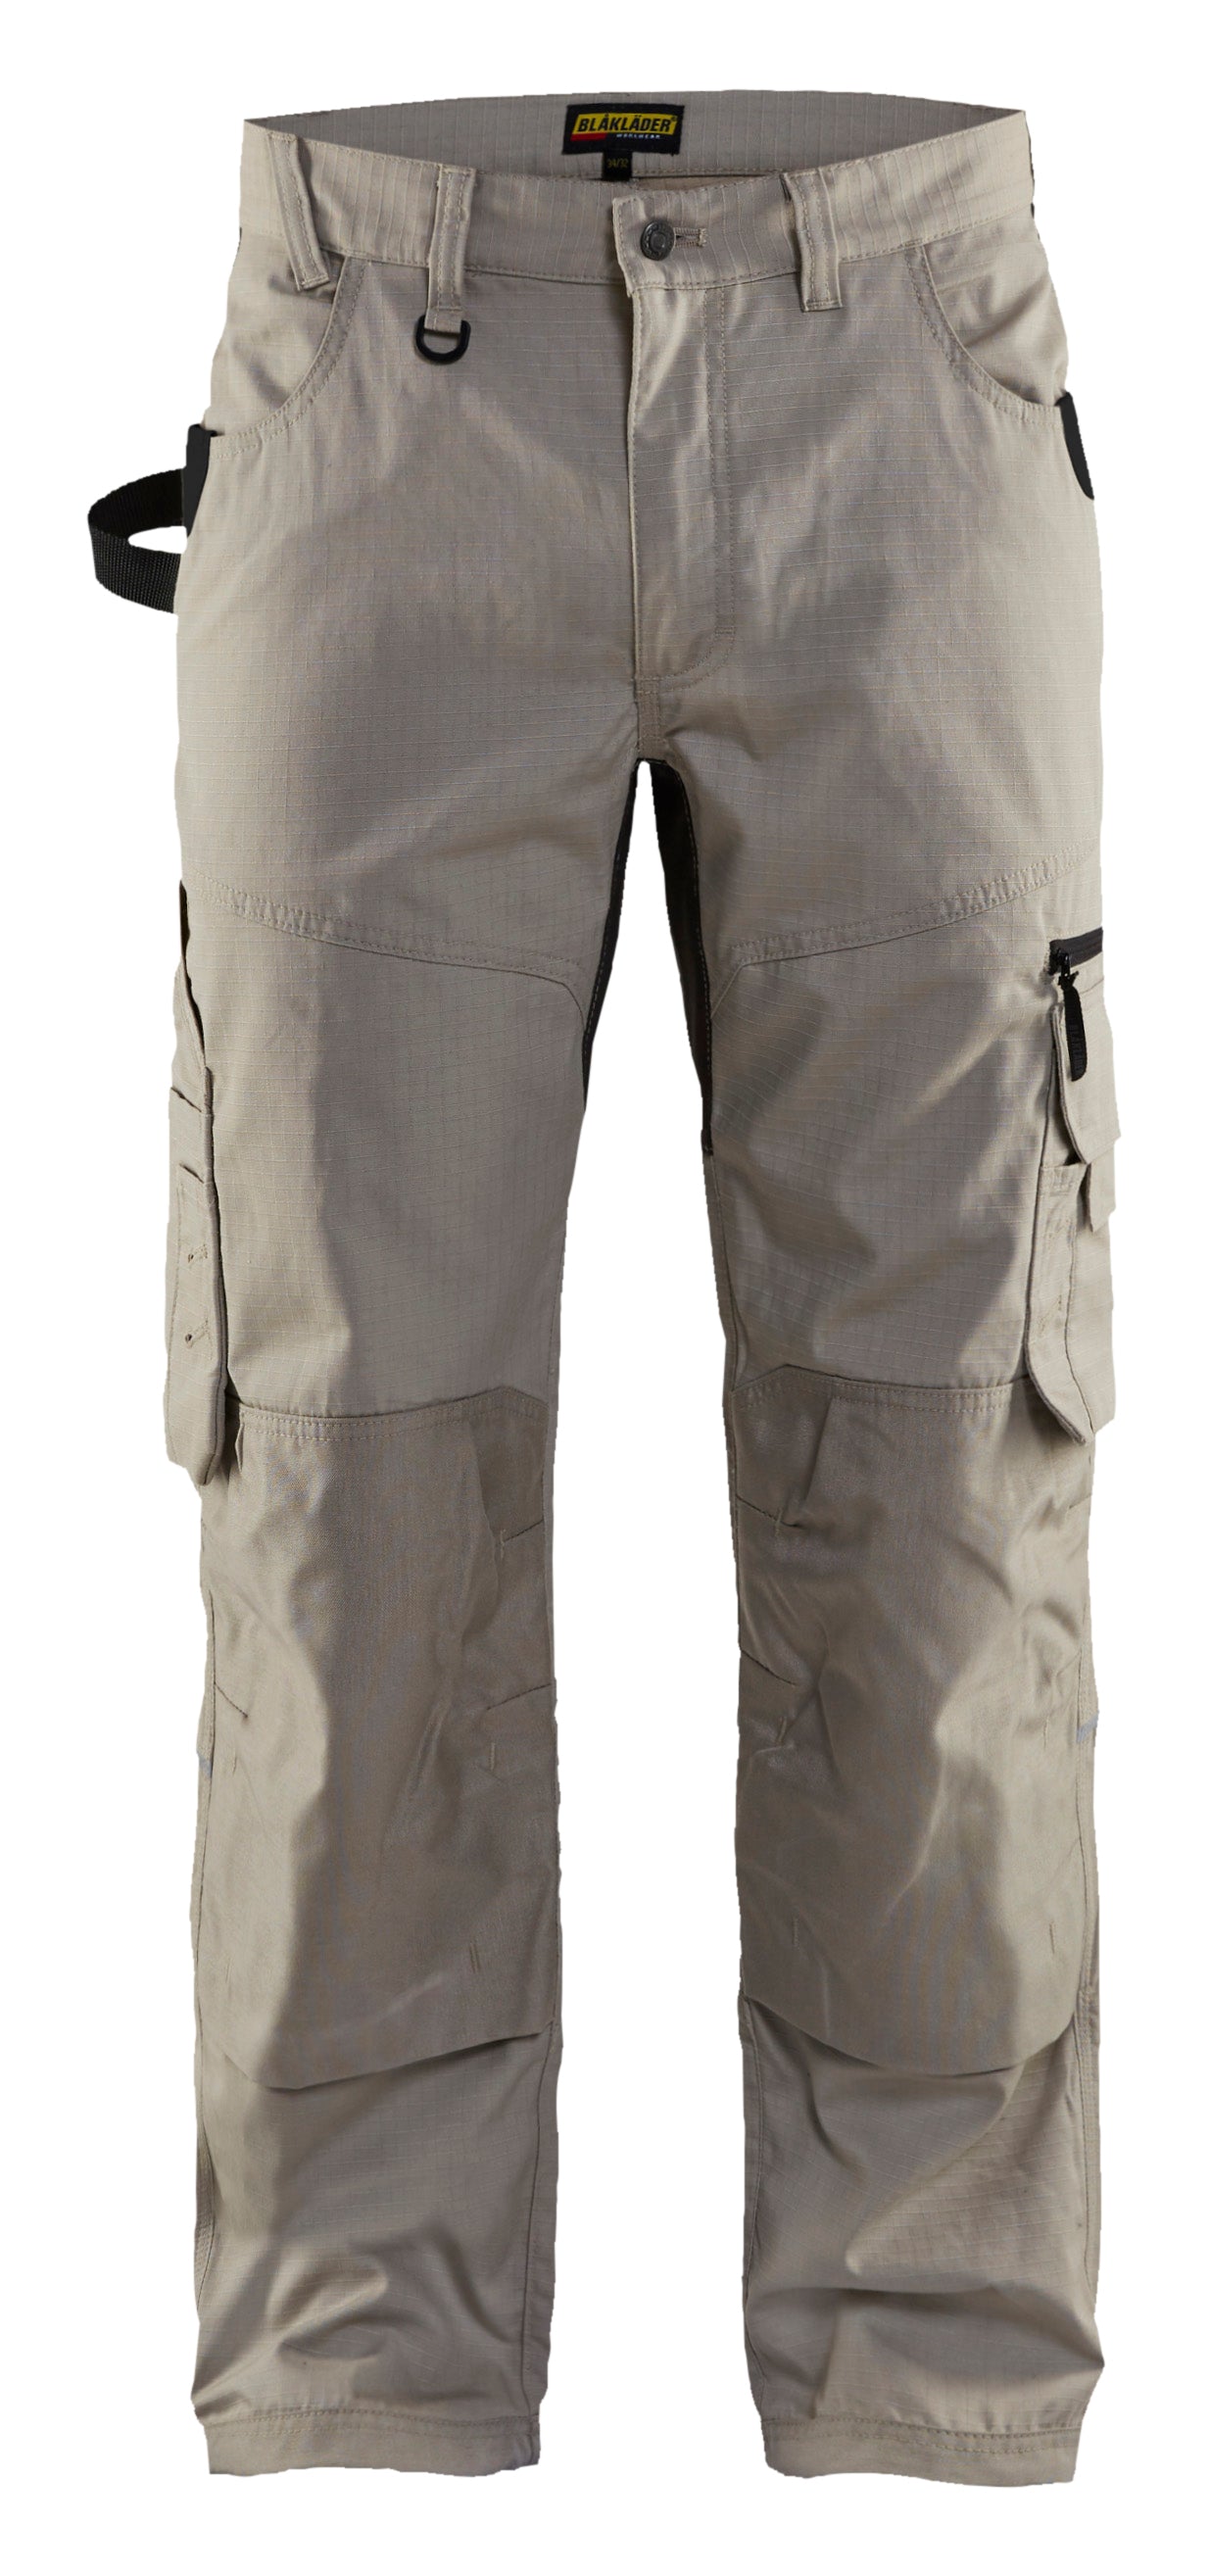 Blaklader 1690 7oz Rip Stop Pants with Stretch - Stone